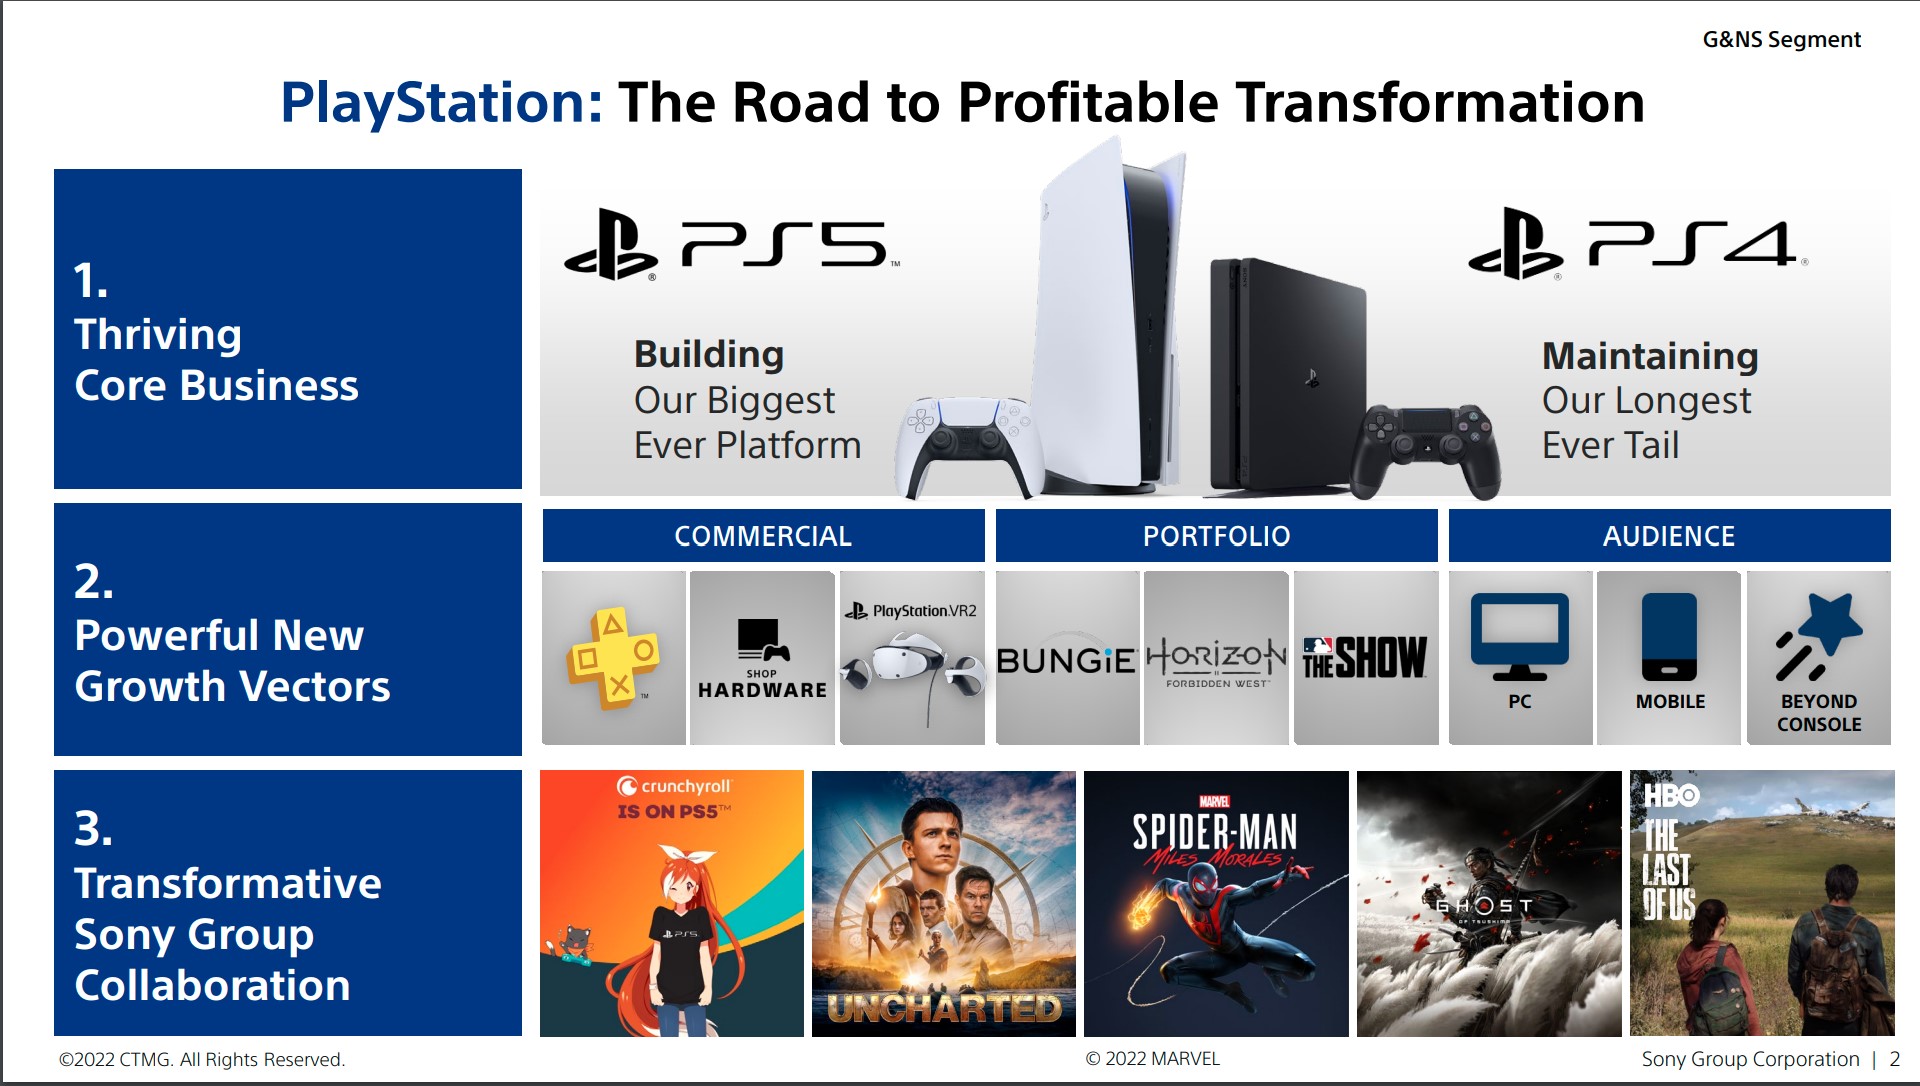 Sony’s PC game sales revenue increased significantly